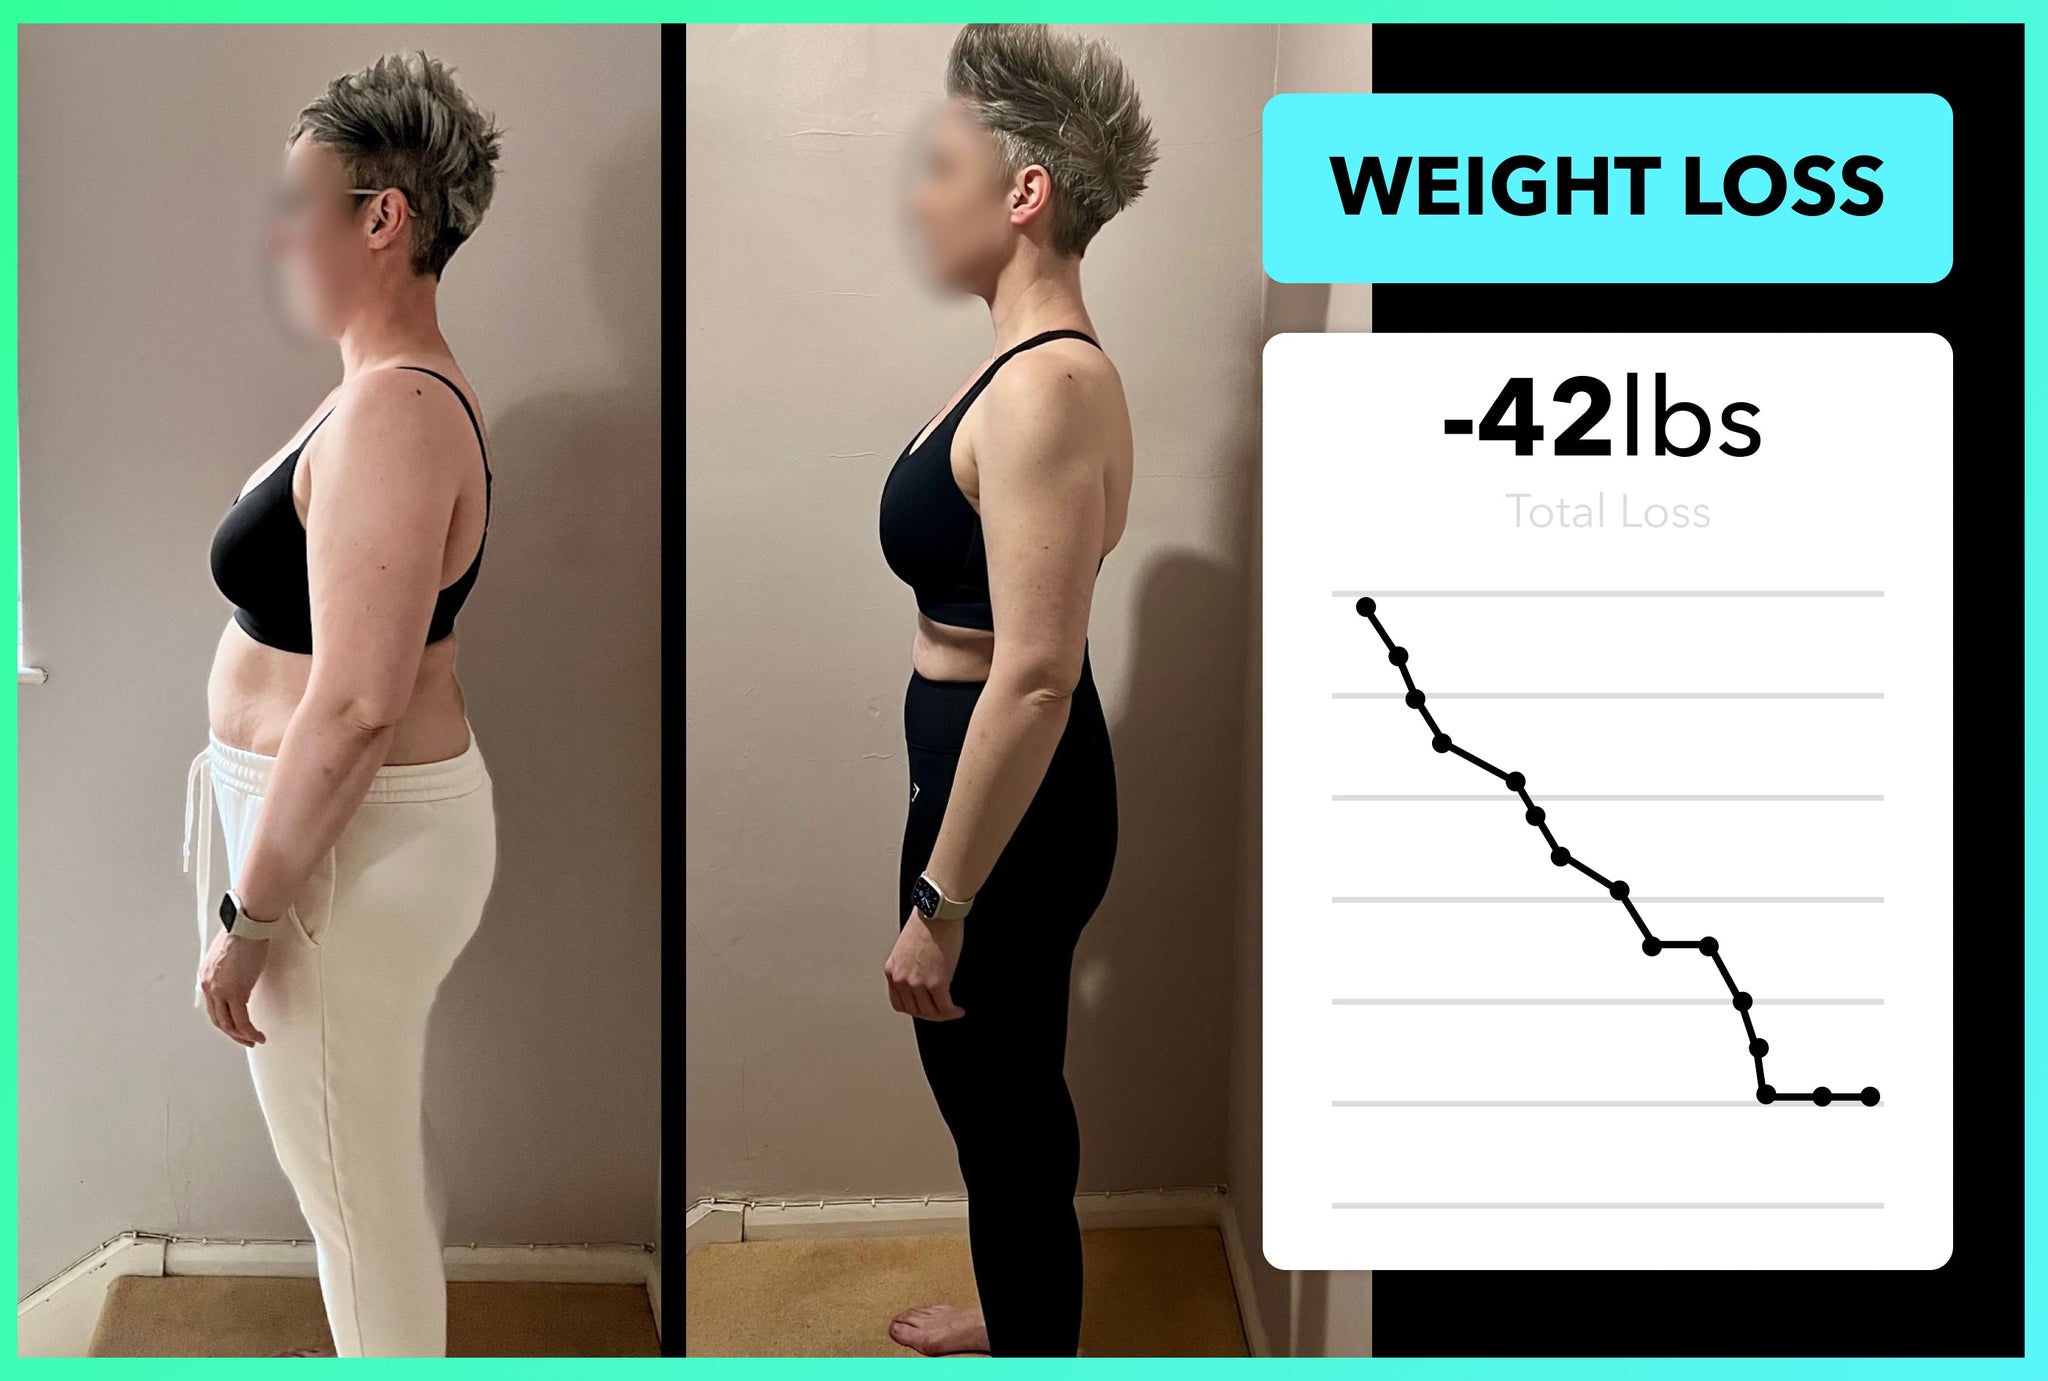 Here's how Kelly lost 42lbs with Team RH!